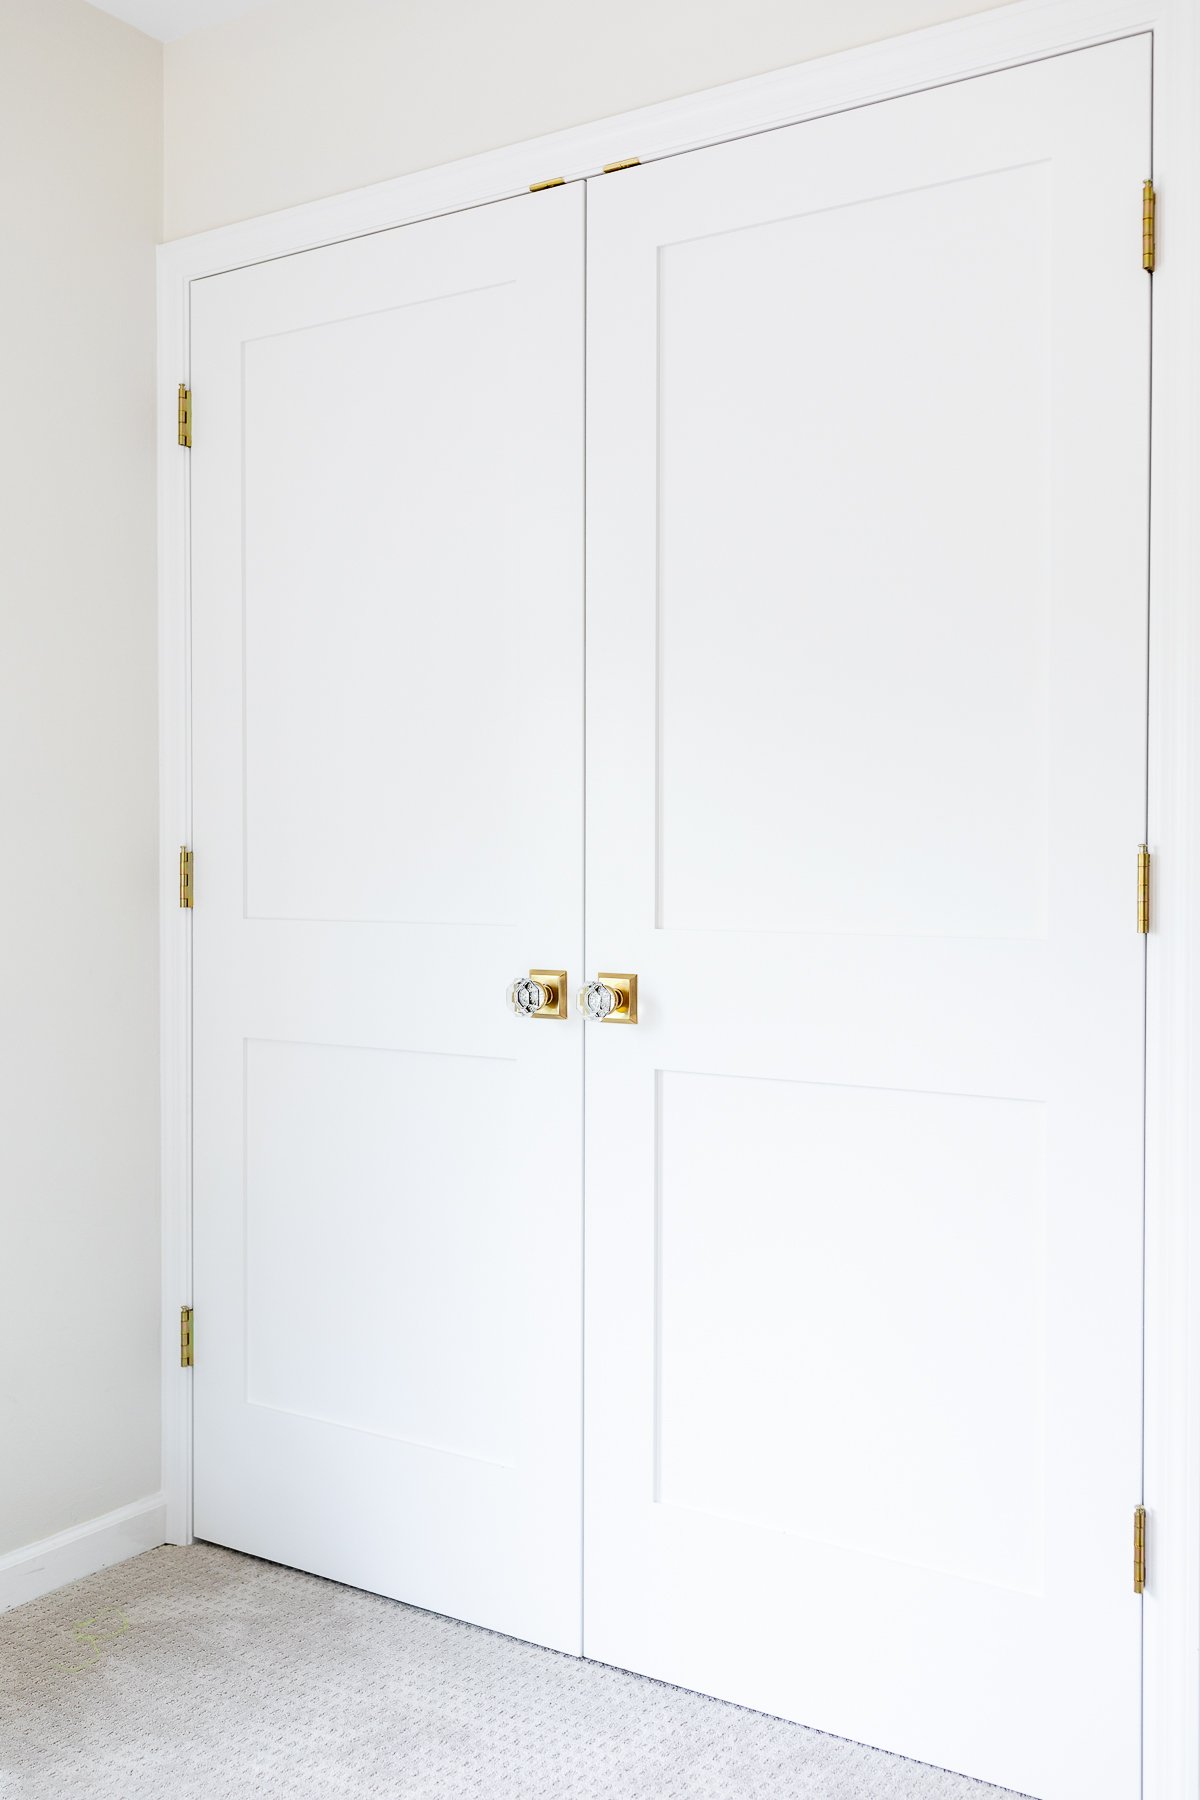 A white shaker style closet door with brass handles.